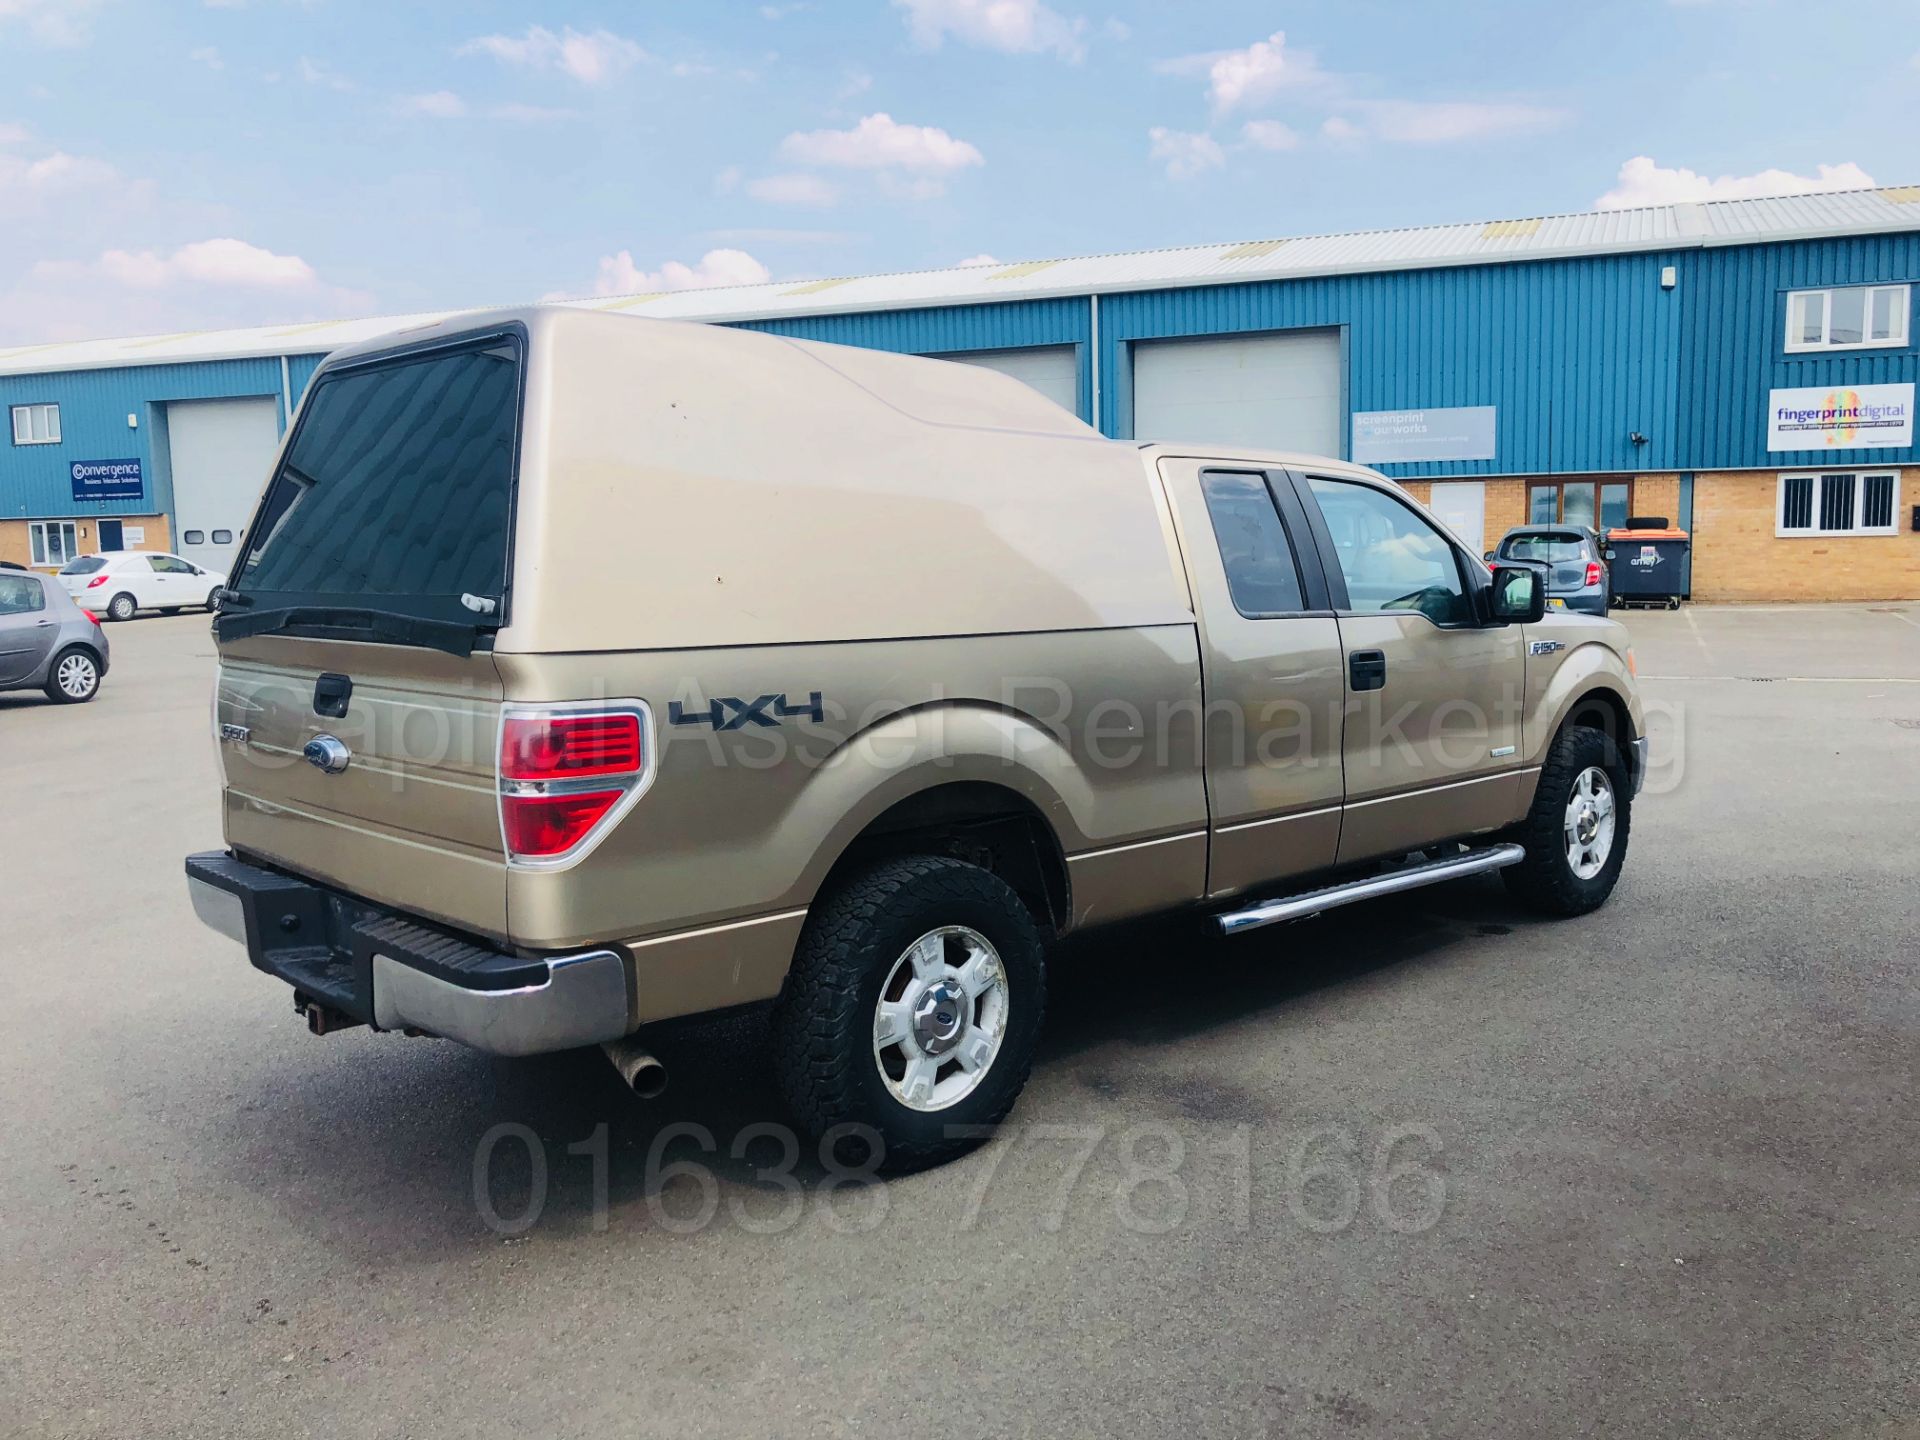 (On Sale) FORD F-150 5.4 V8 XLT EDITION KING-CAB (2012) MODEL**4X4**6 SEATER**AUTOMATIC *TOP SPEC* - Image 14 of 52